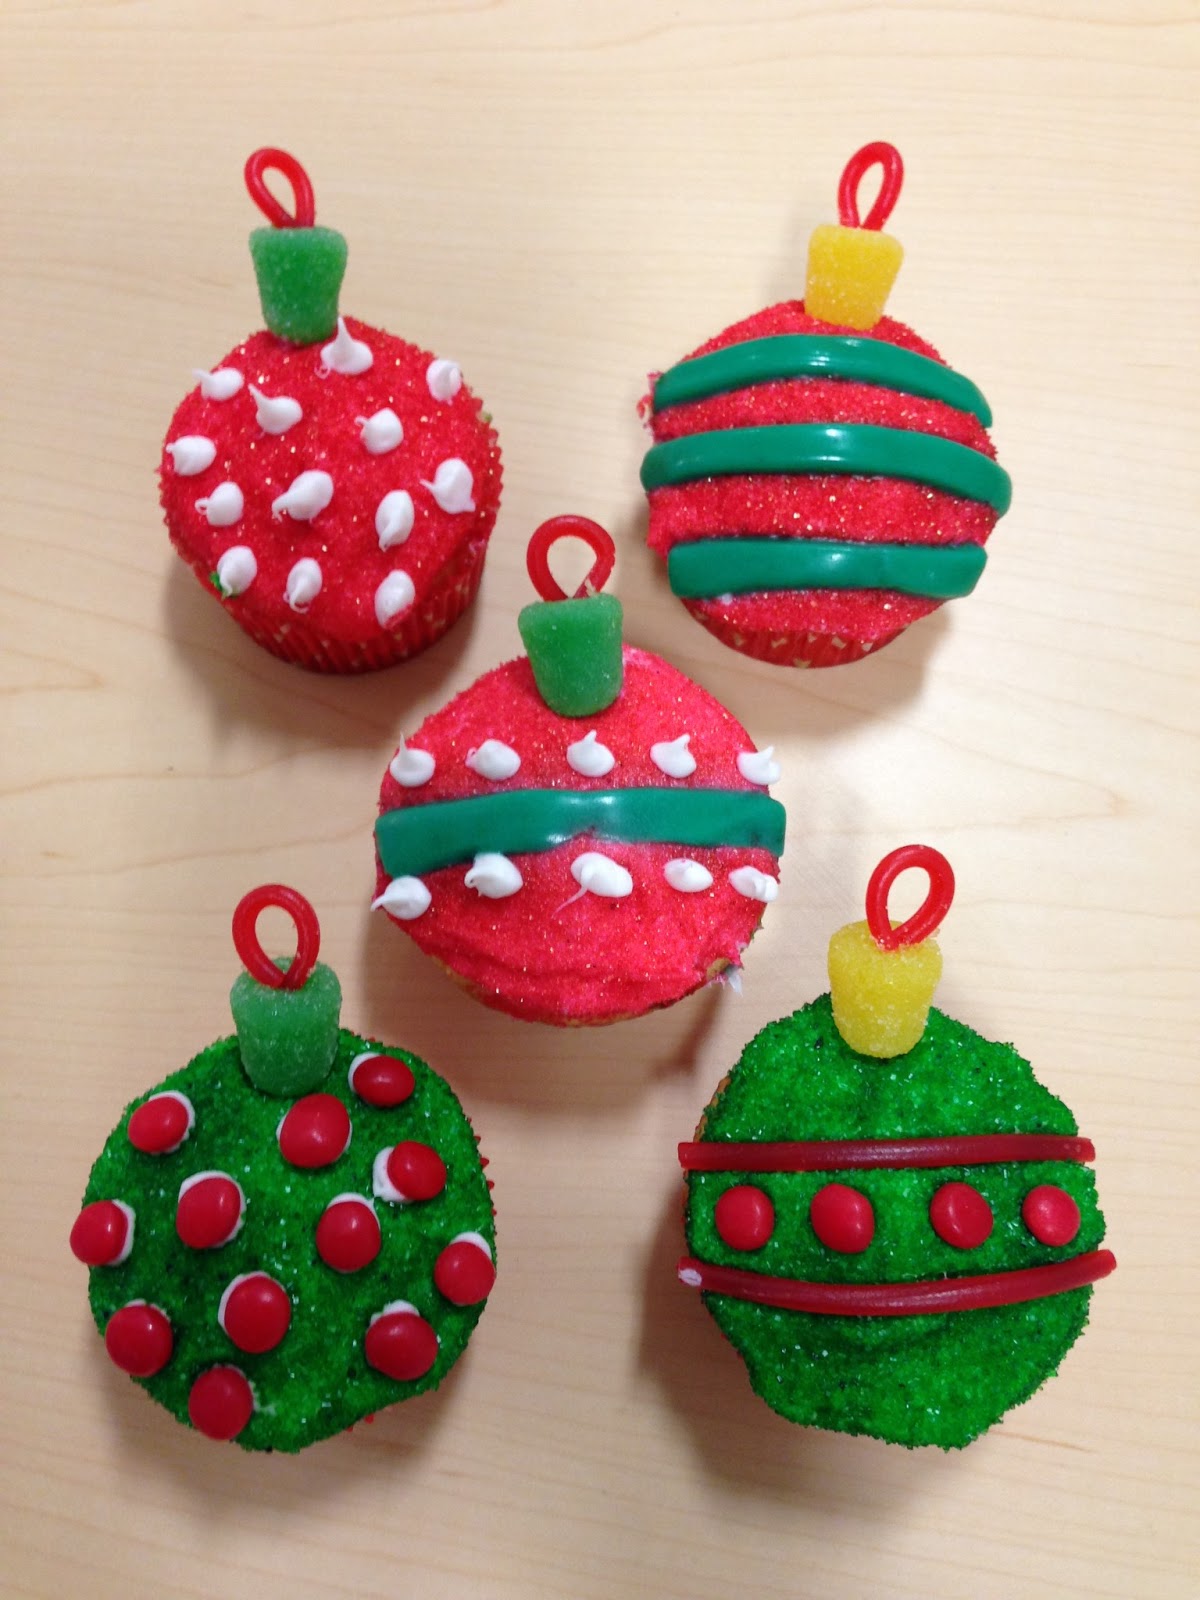 The Project Diary: Christmas Ornament Cupcakes